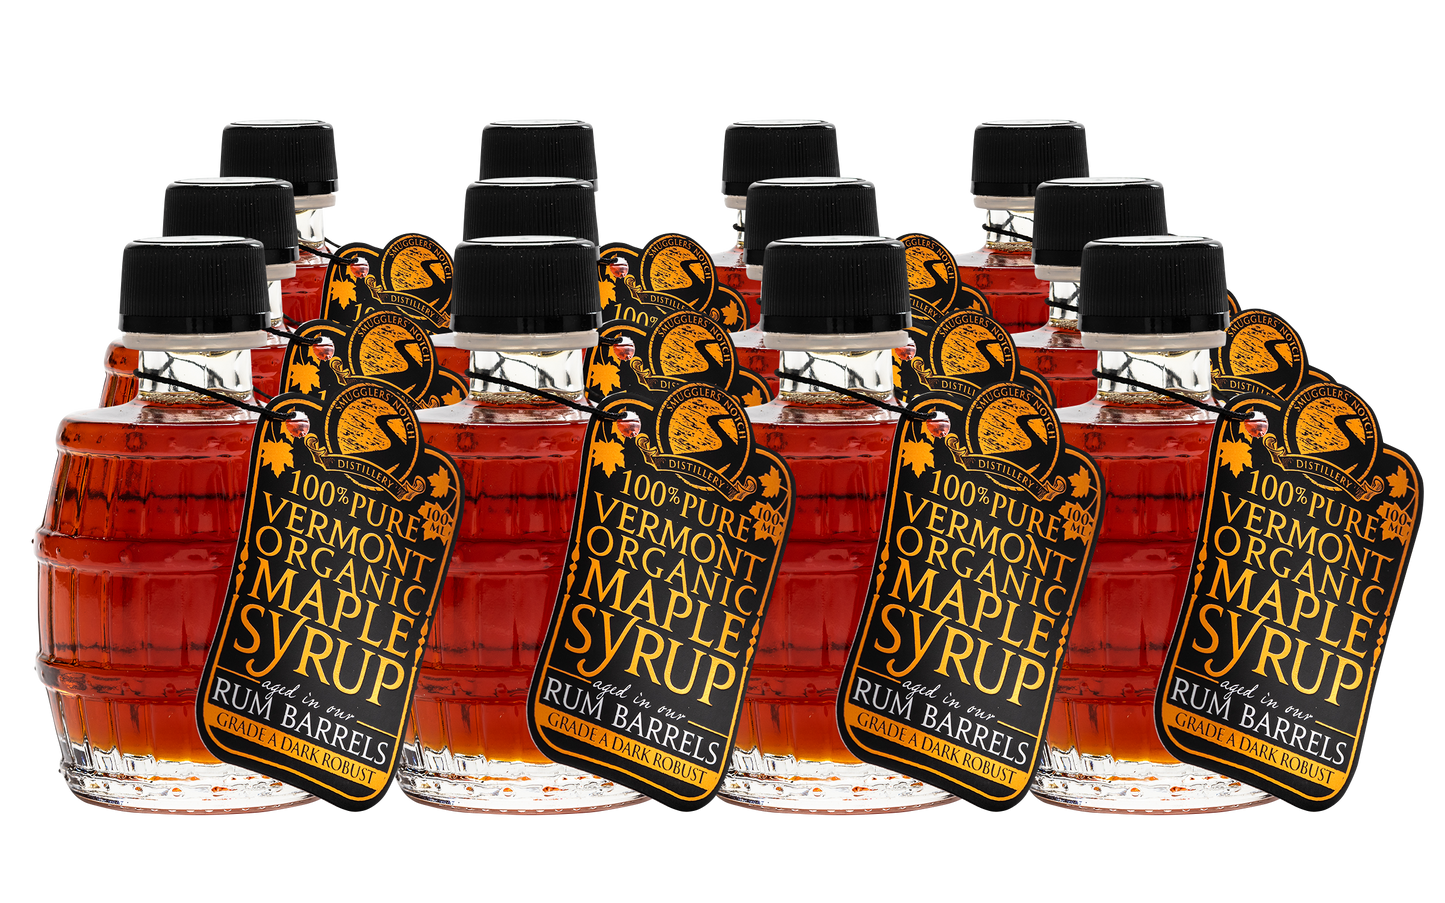 Rum-Barrel Aged Maple Syrup 12-Pack of 100mL Bottles